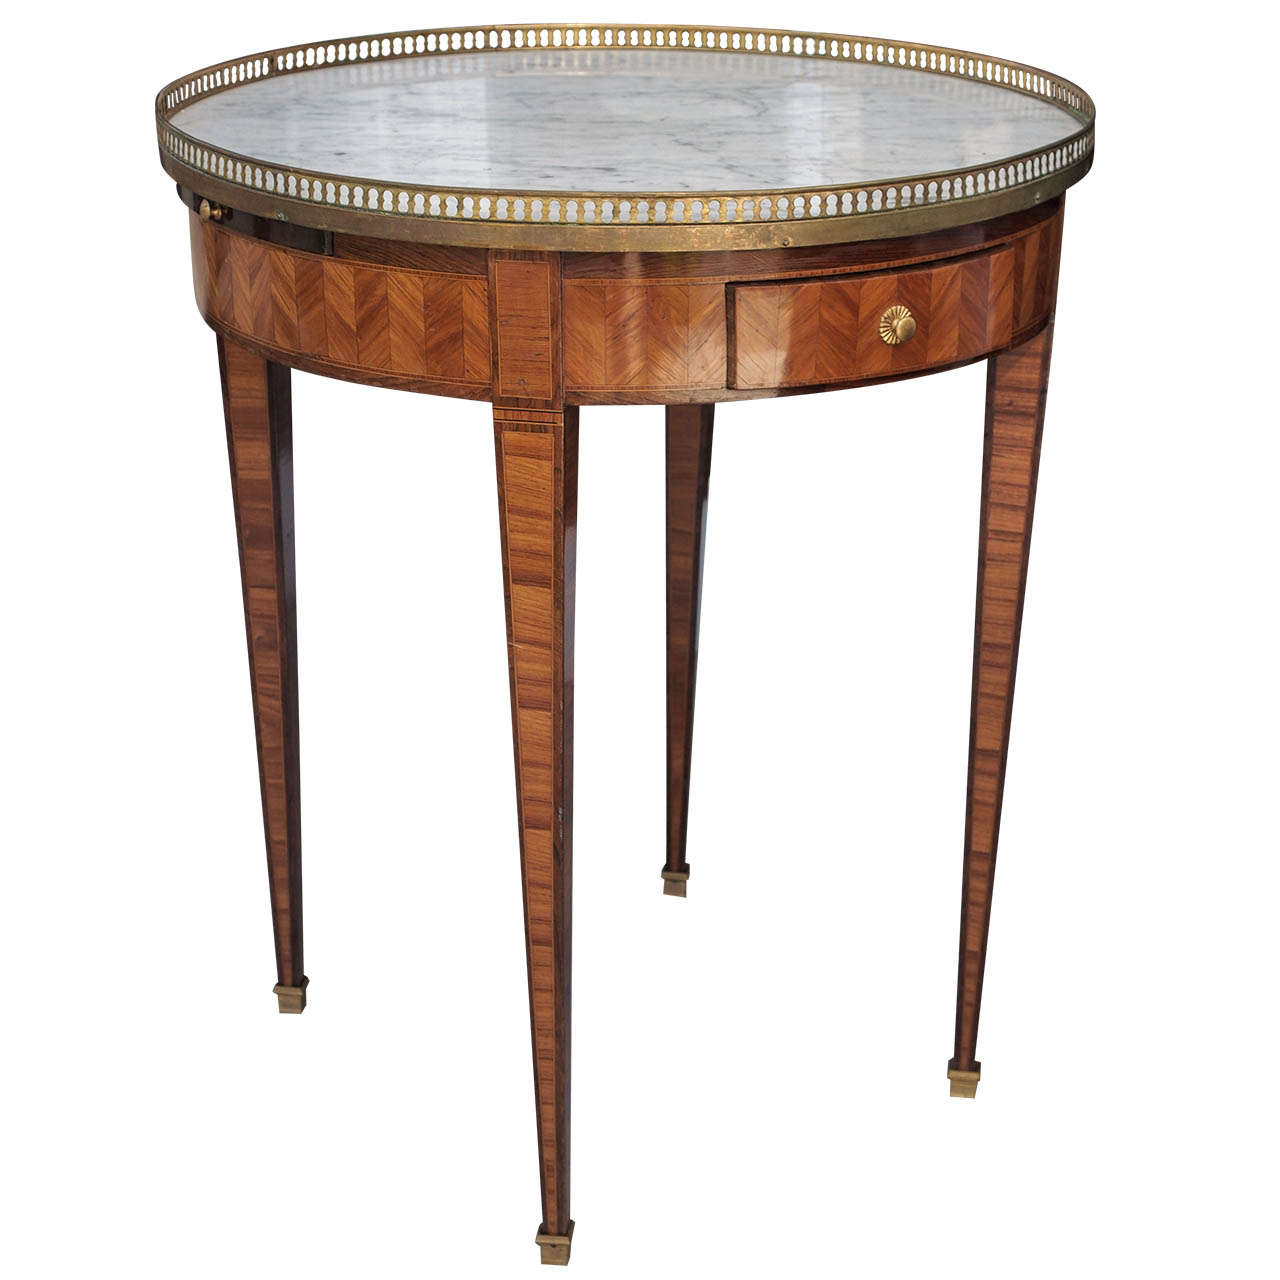 French Early 19th c. Marquetry Bouillotte Table